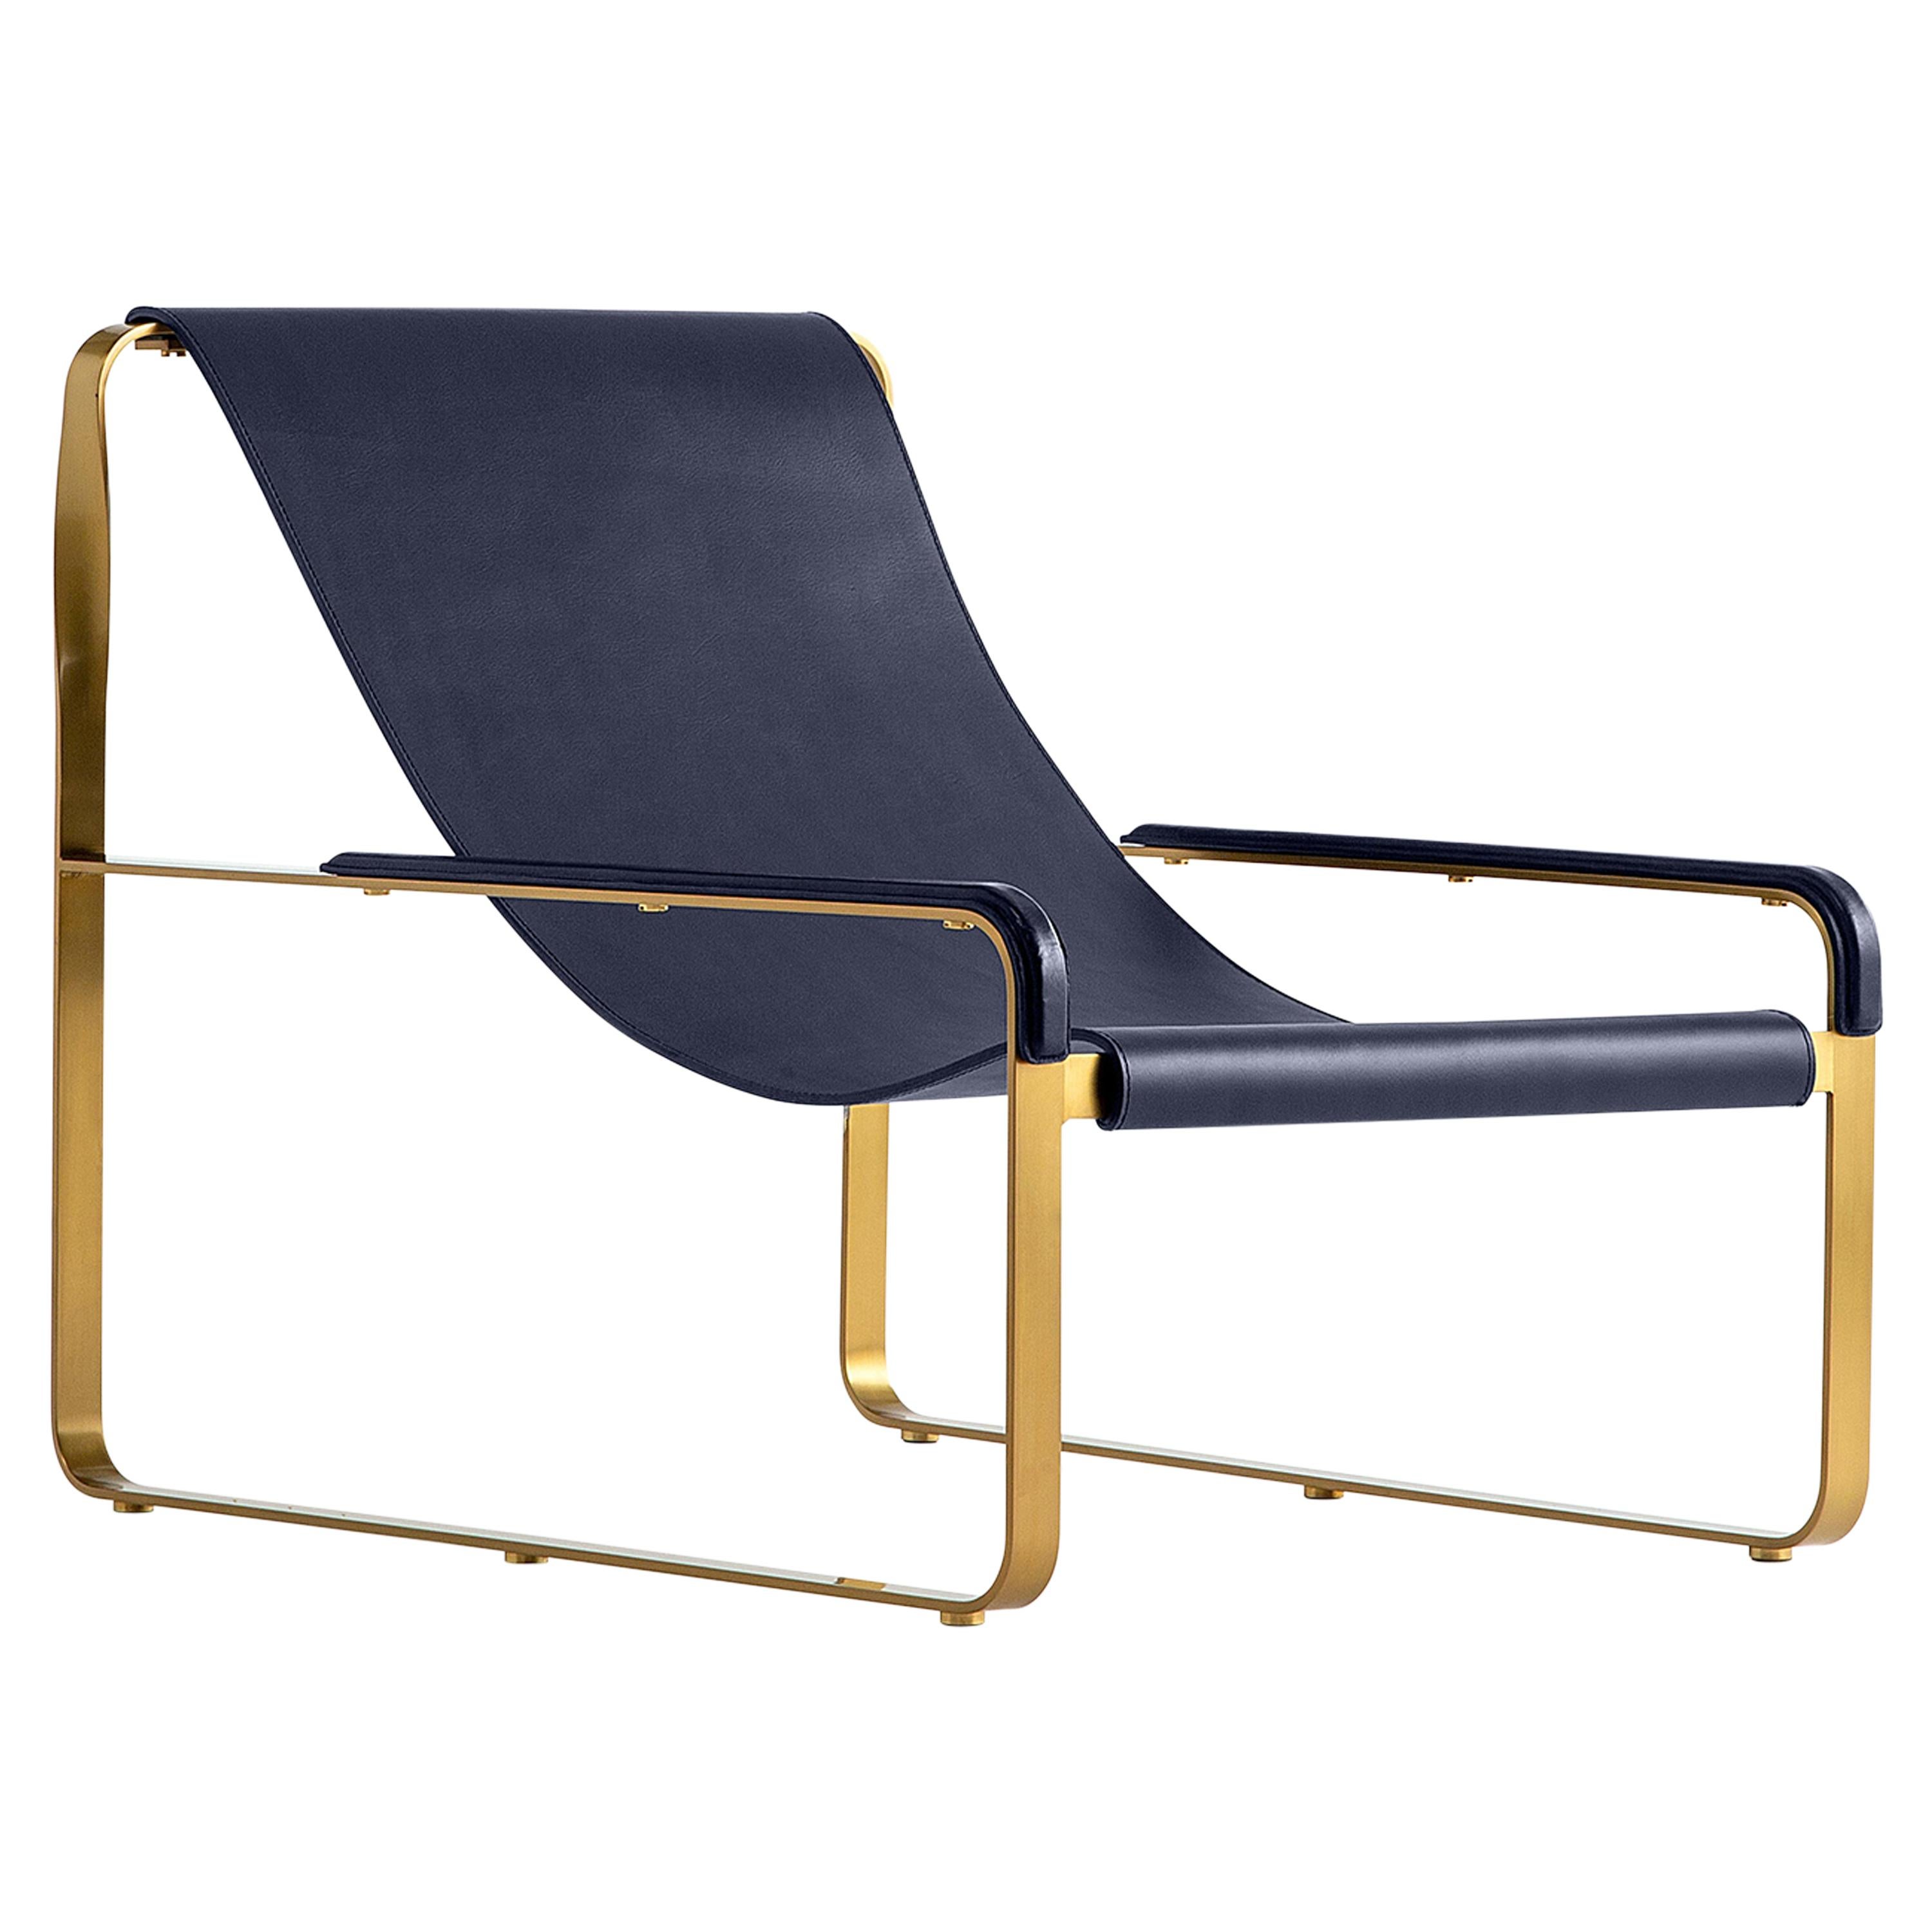 Chaise longue Classic Contemporary Steel Aged Brass & Navy Blue Leather